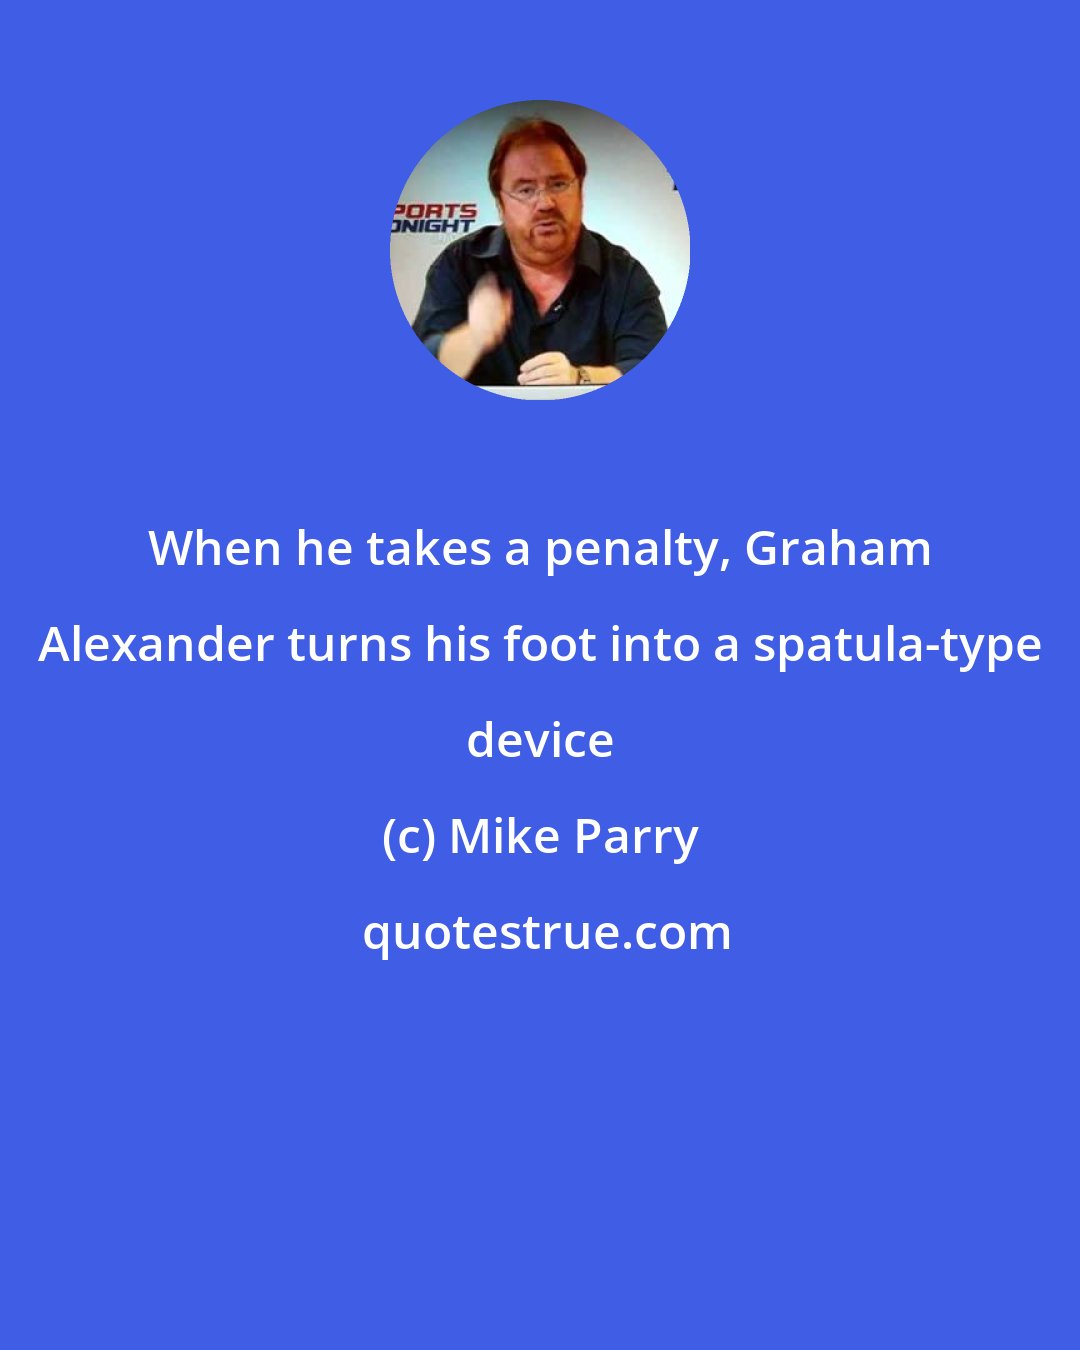 Mike Parry: When he takes a penalty, Graham Alexander turns his foot into a spatula-type device